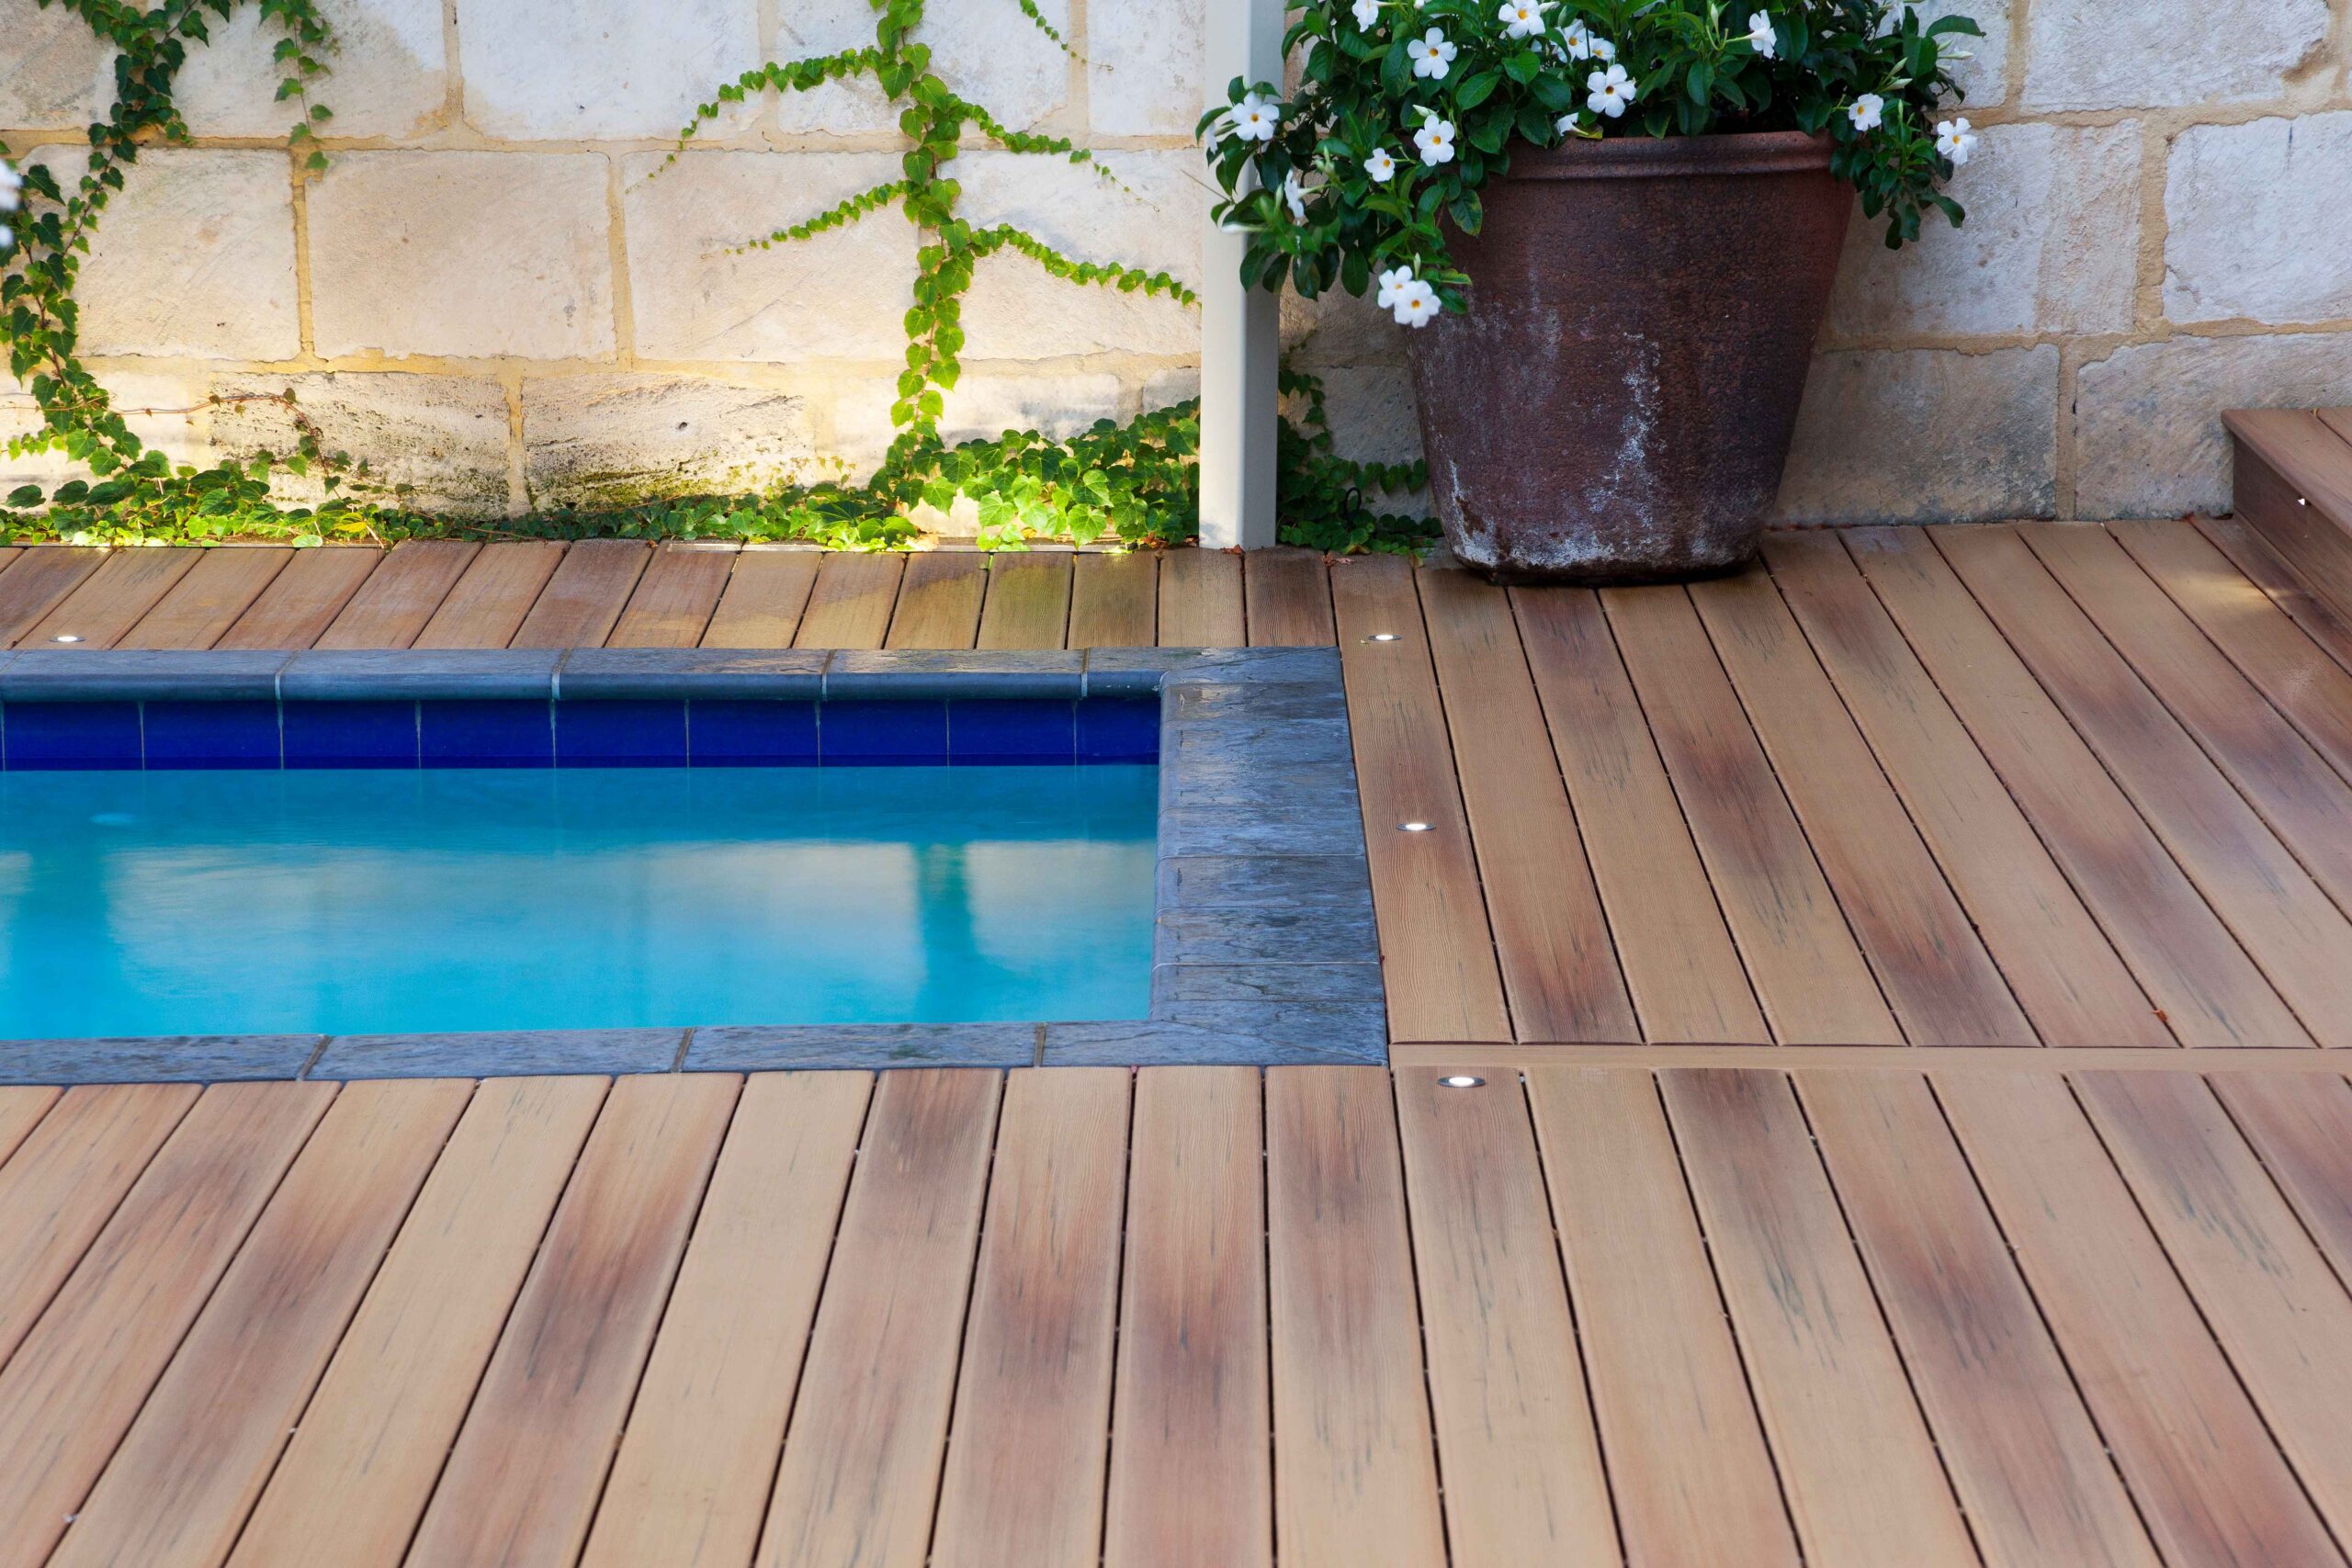 Composite Decking and pool - hardwoods collection - Barrette Outdoorliving